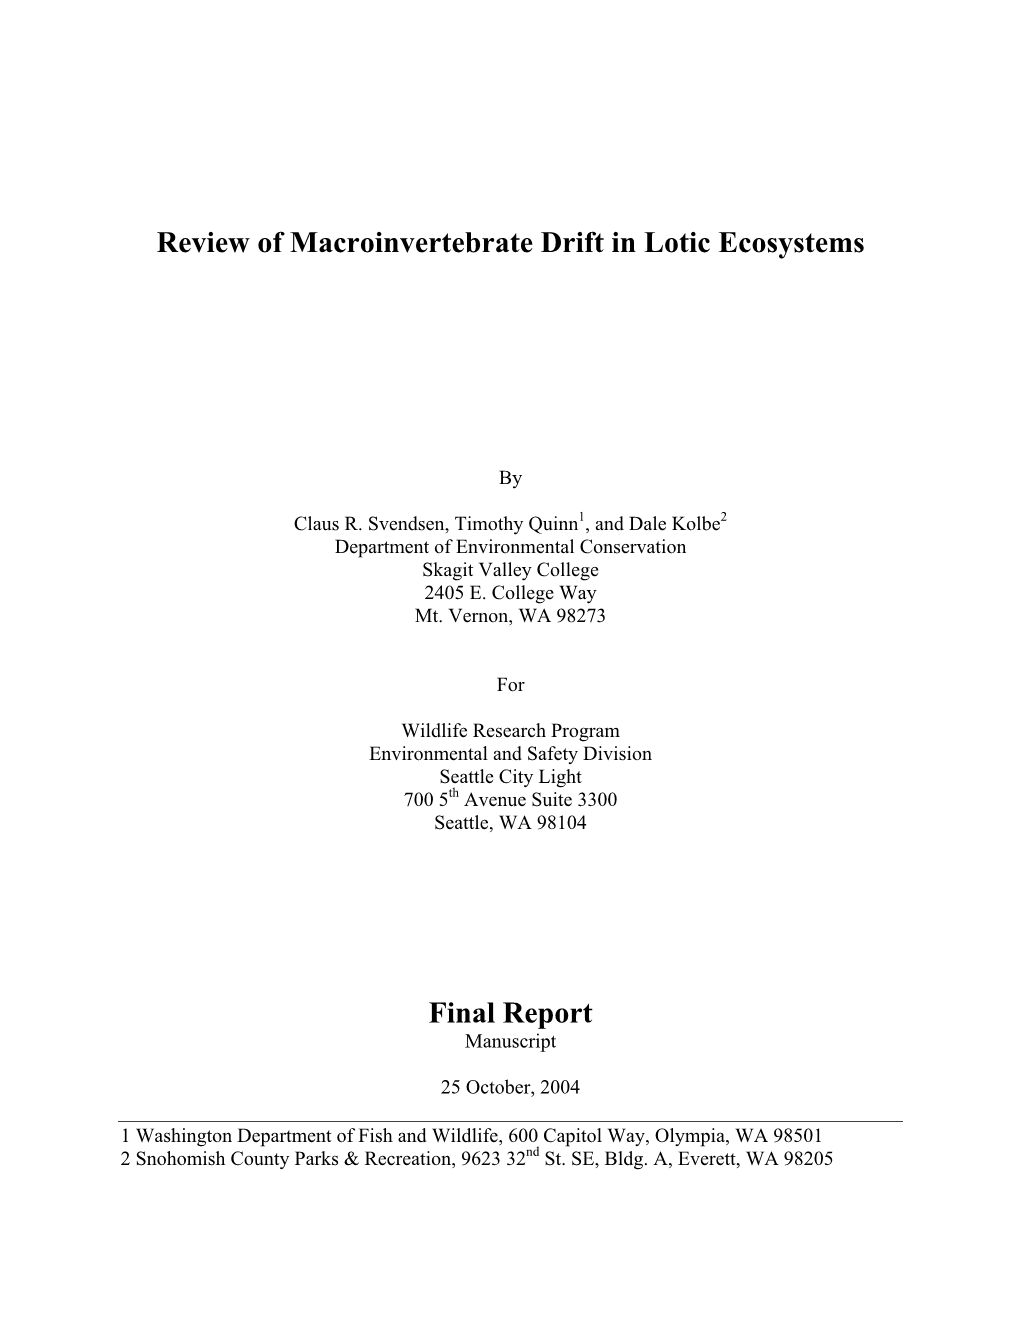 Review of Macroinvertebrate Drift in Lotic Ecosystems